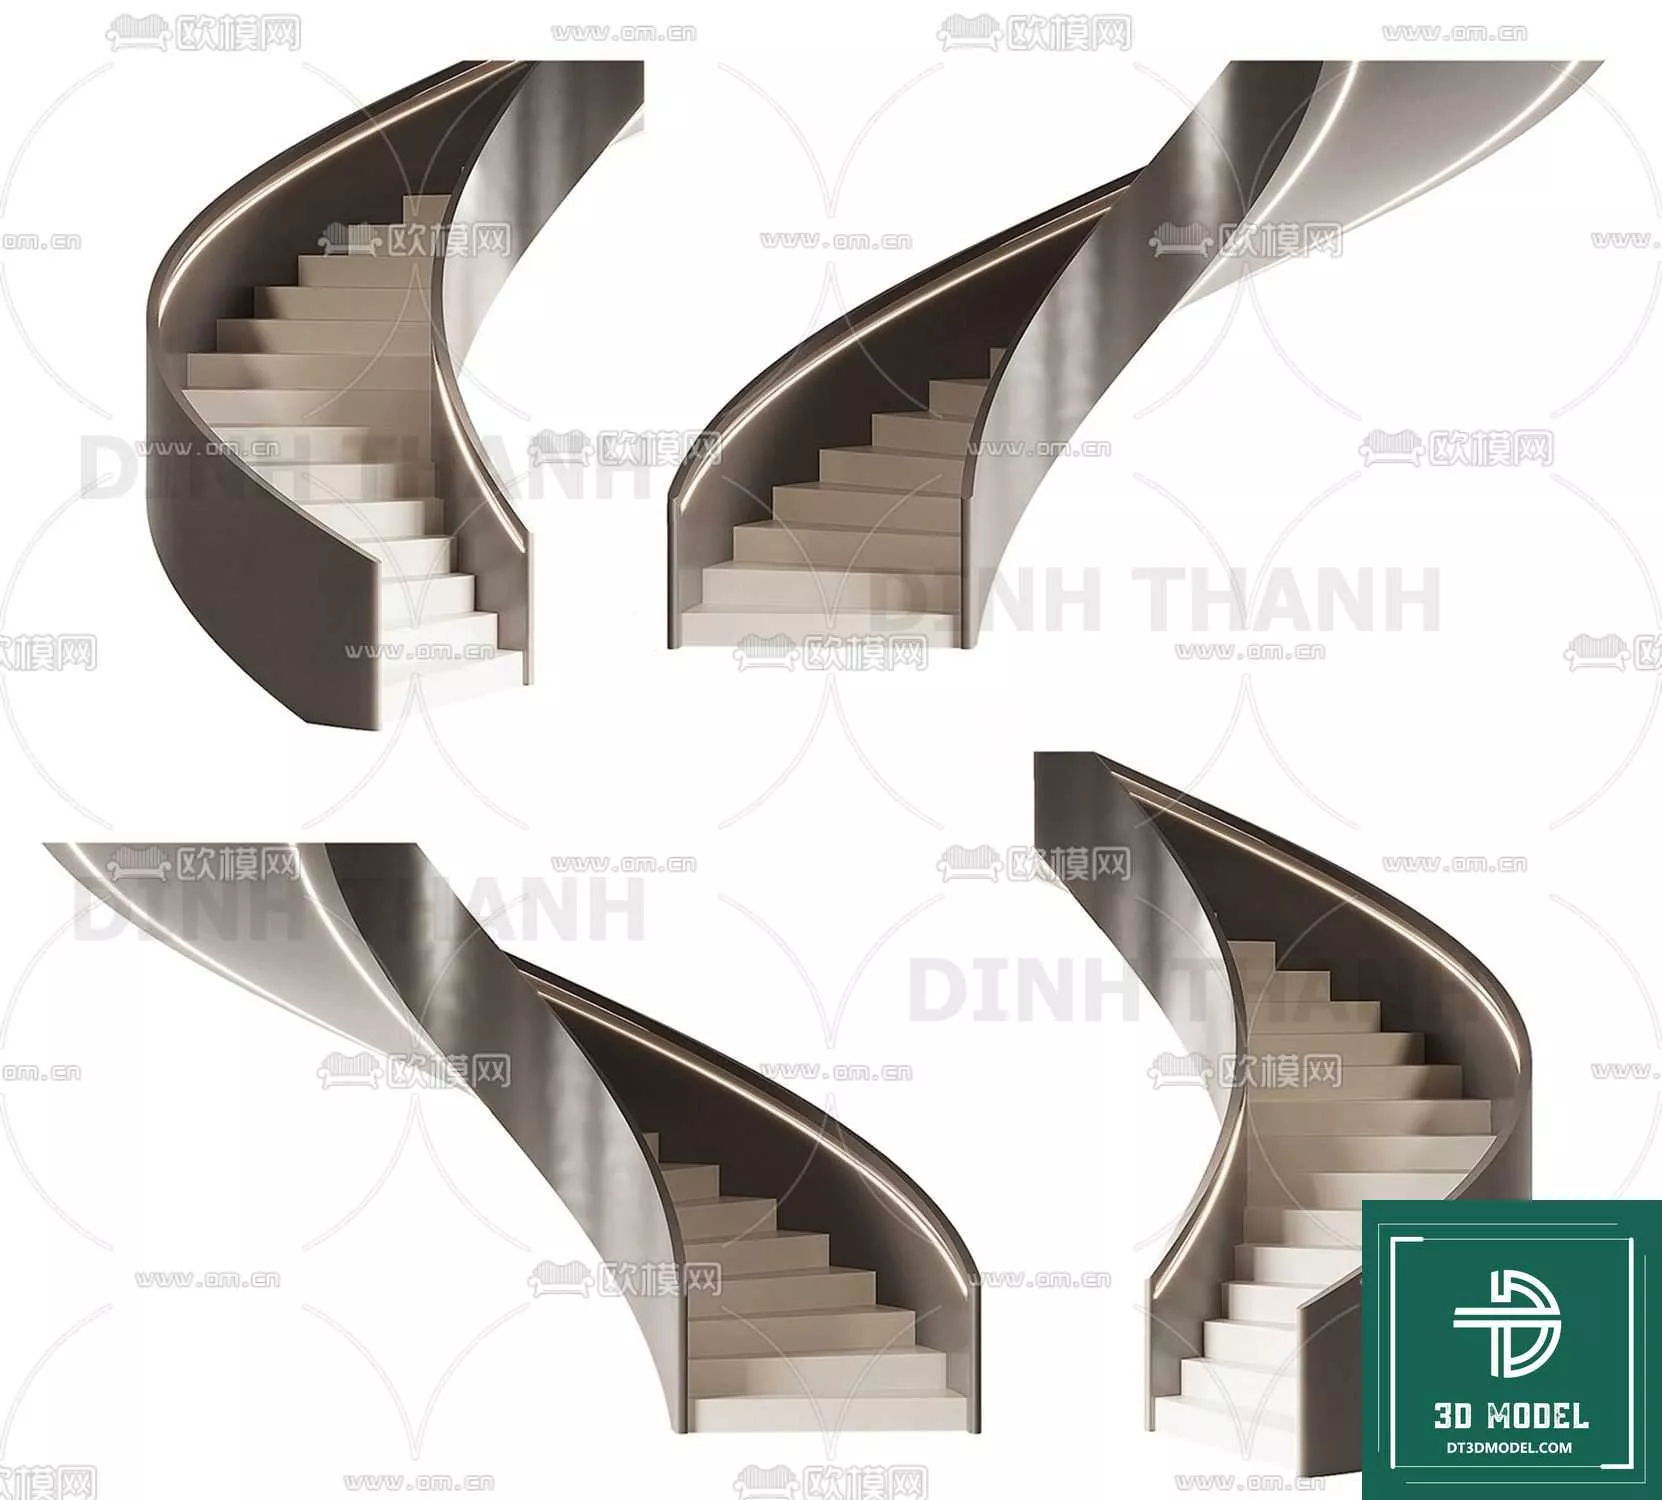 MODERN STAIR - SKETCHUP 3D MODEL - VRAY OR ENSCAPE - ID14213